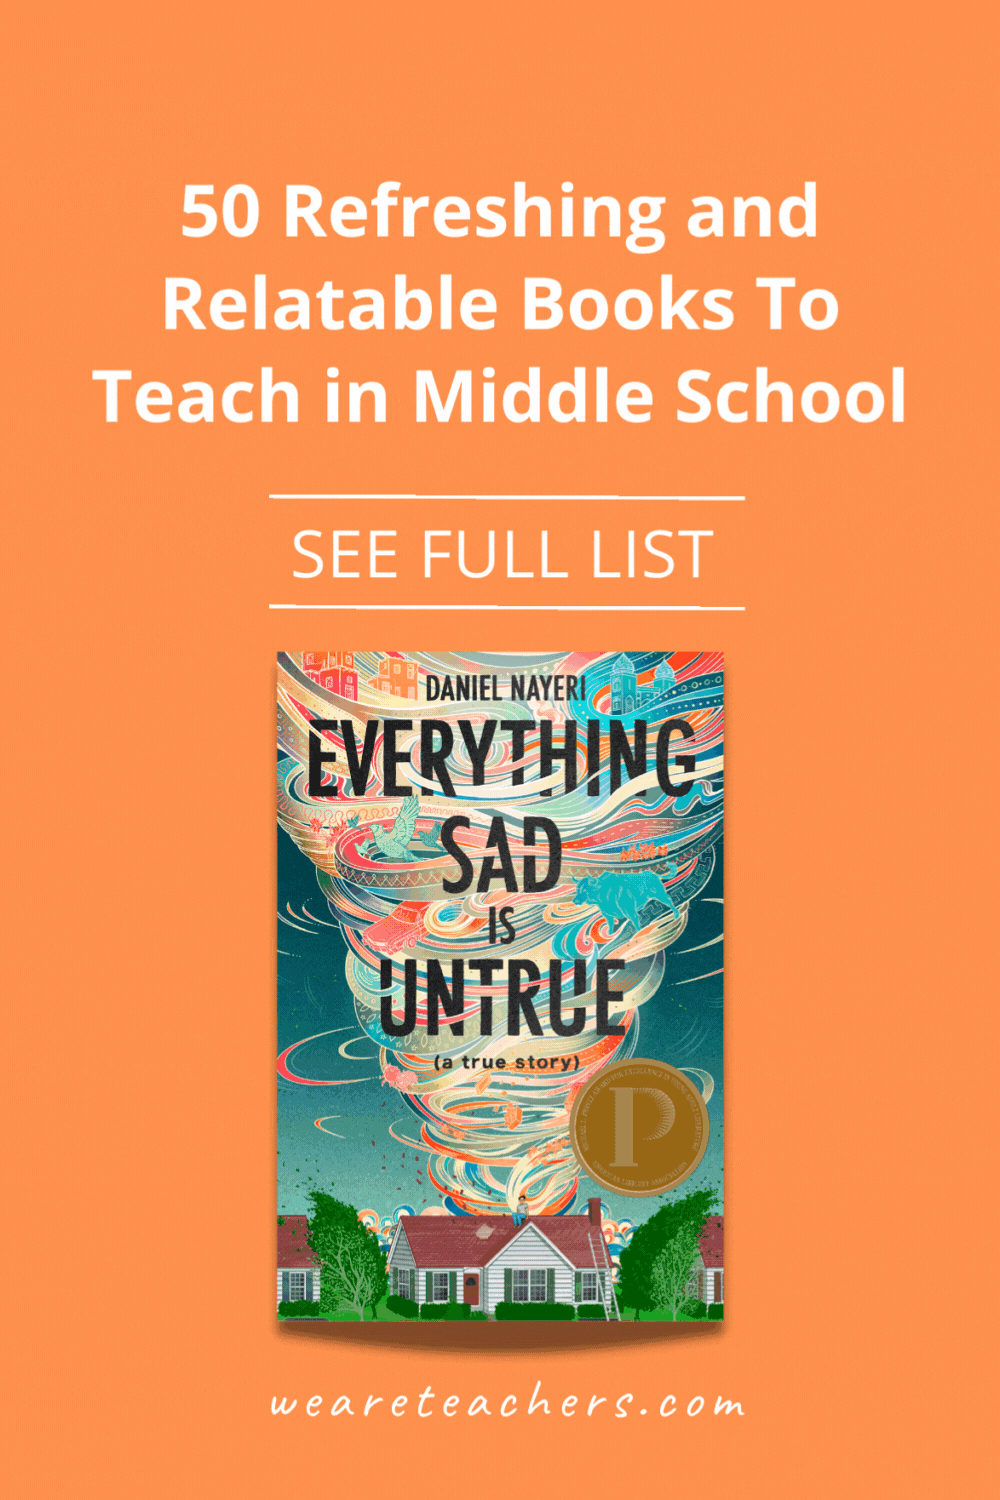 Want to know the best middle school books to use in your class? We love these life-changing selections that will help your students grow.